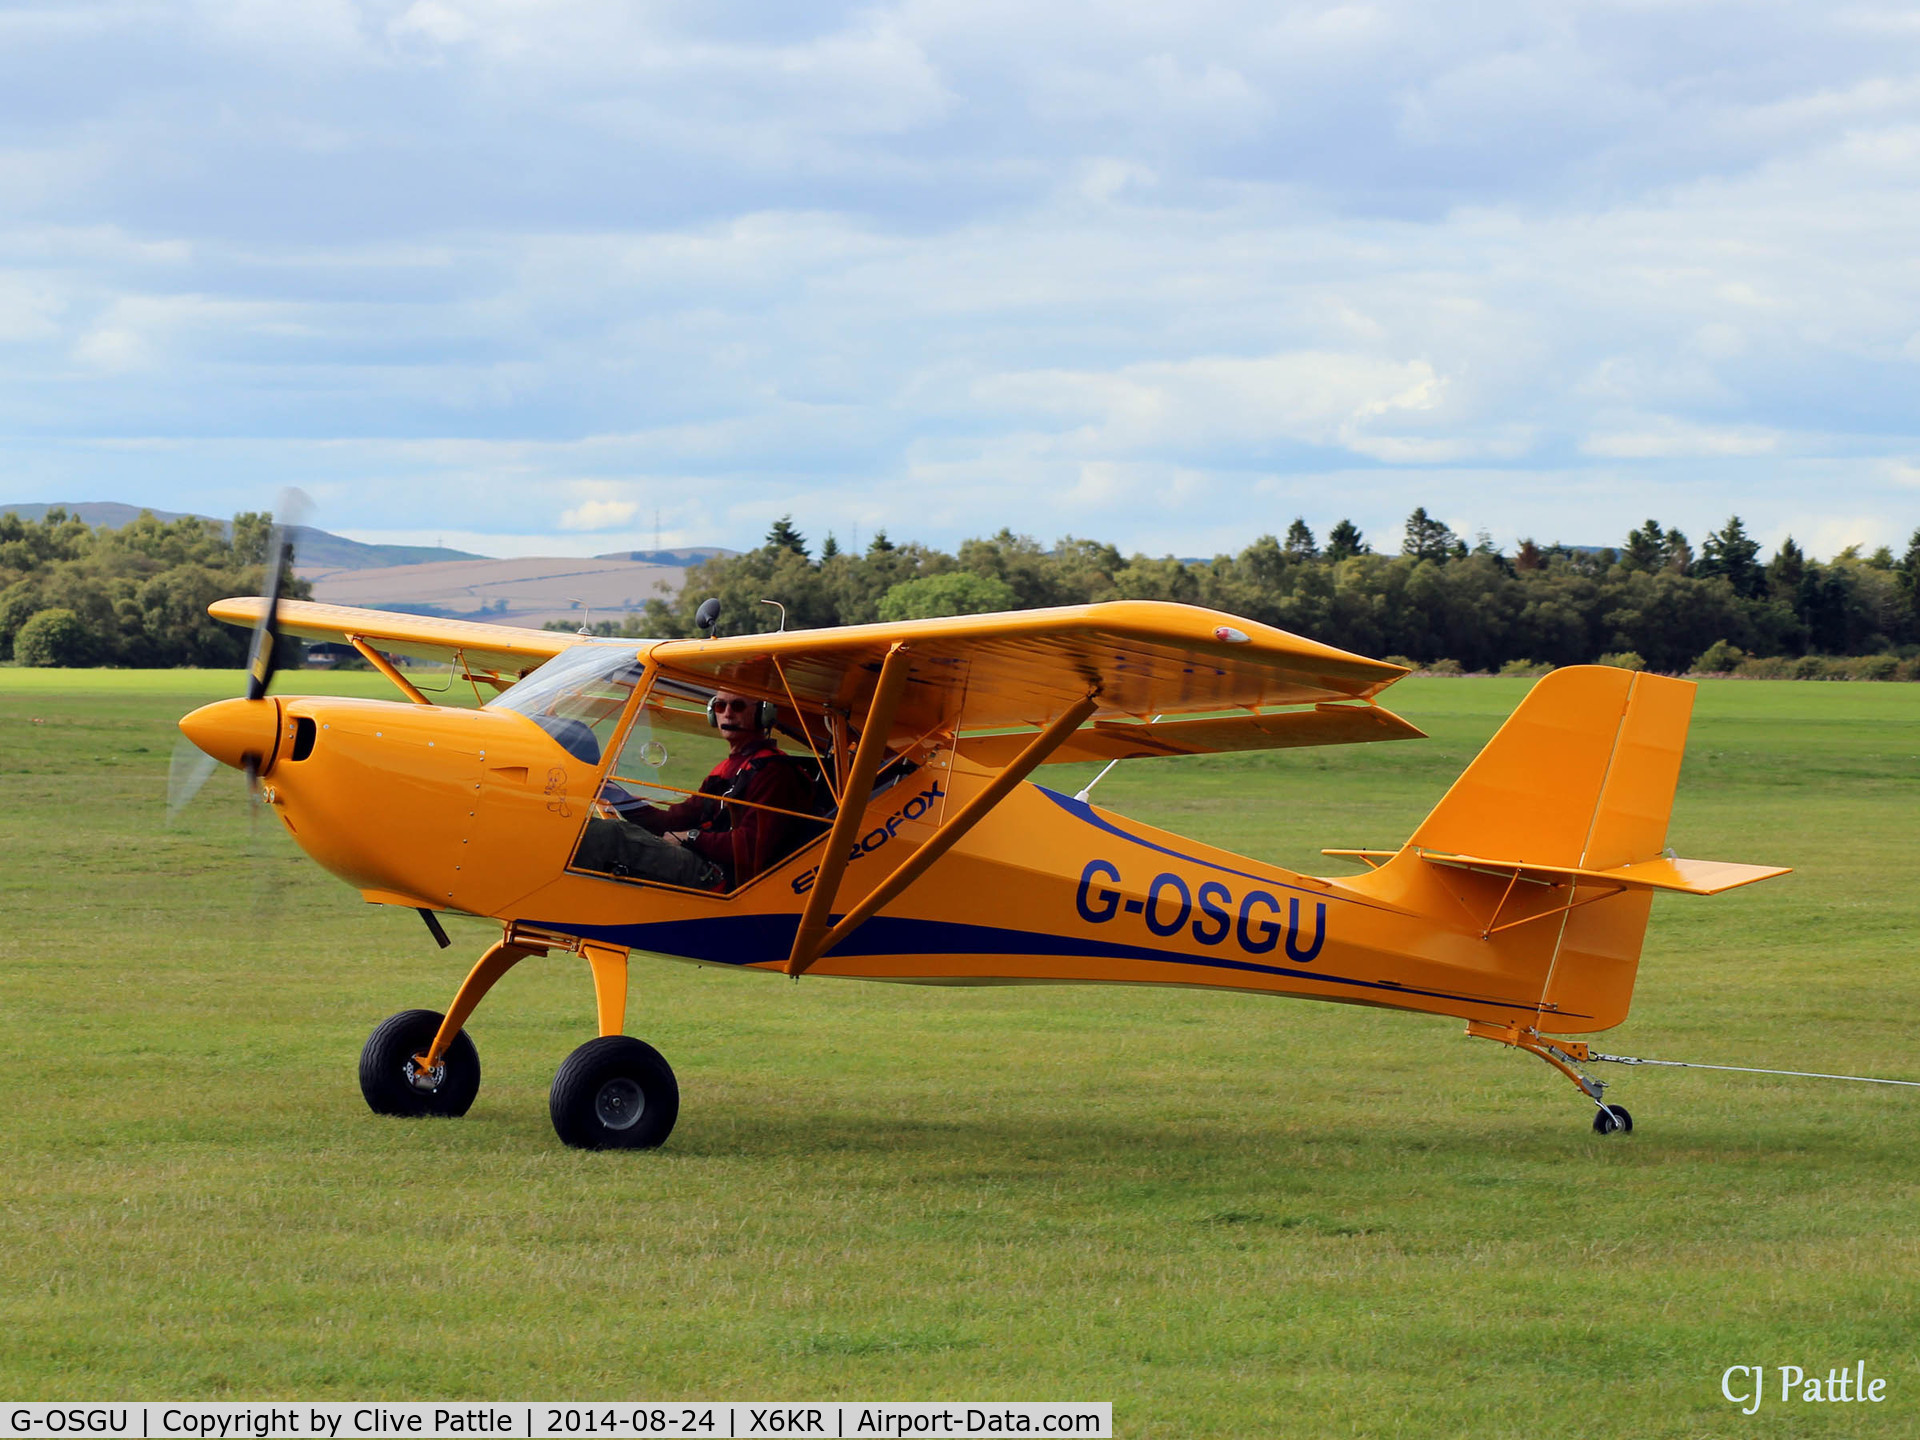 G-OSGU, 2014 Aeropro Eurofox 912(S) C/N LAA 376-15214, Used for aero-tow at Portmoak Gliding Field, Kinross, Scotland is homebuilt G-OSGU, first registered May 2014 the pilot pauses for a pose.